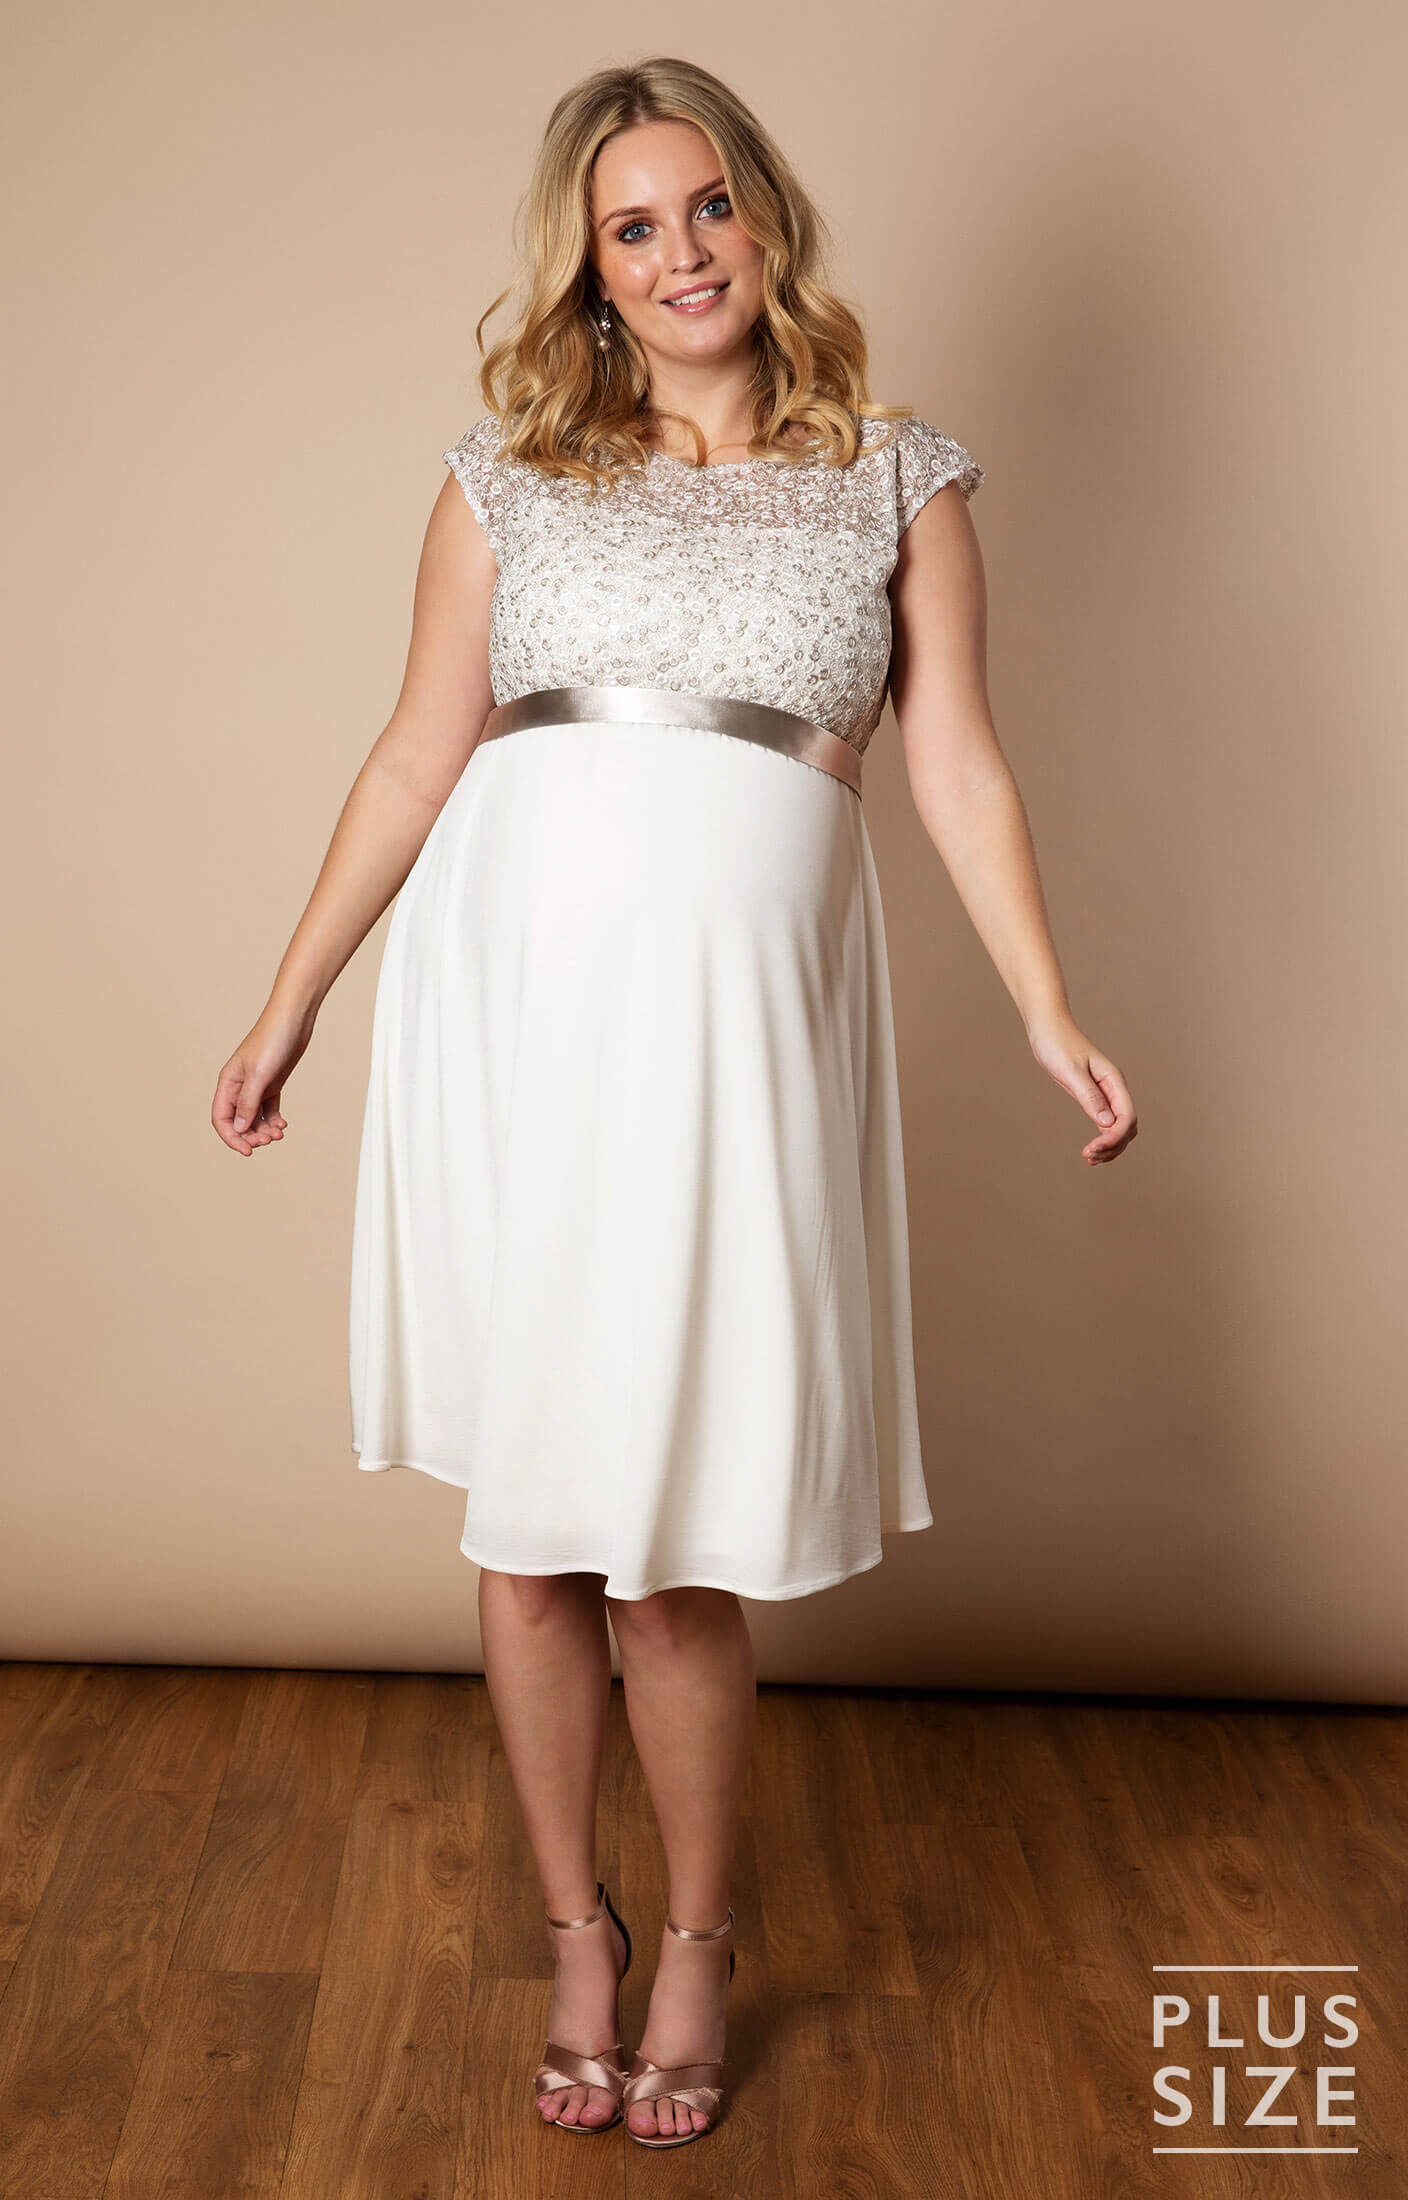 Styling Tips for Plus Size Maternity